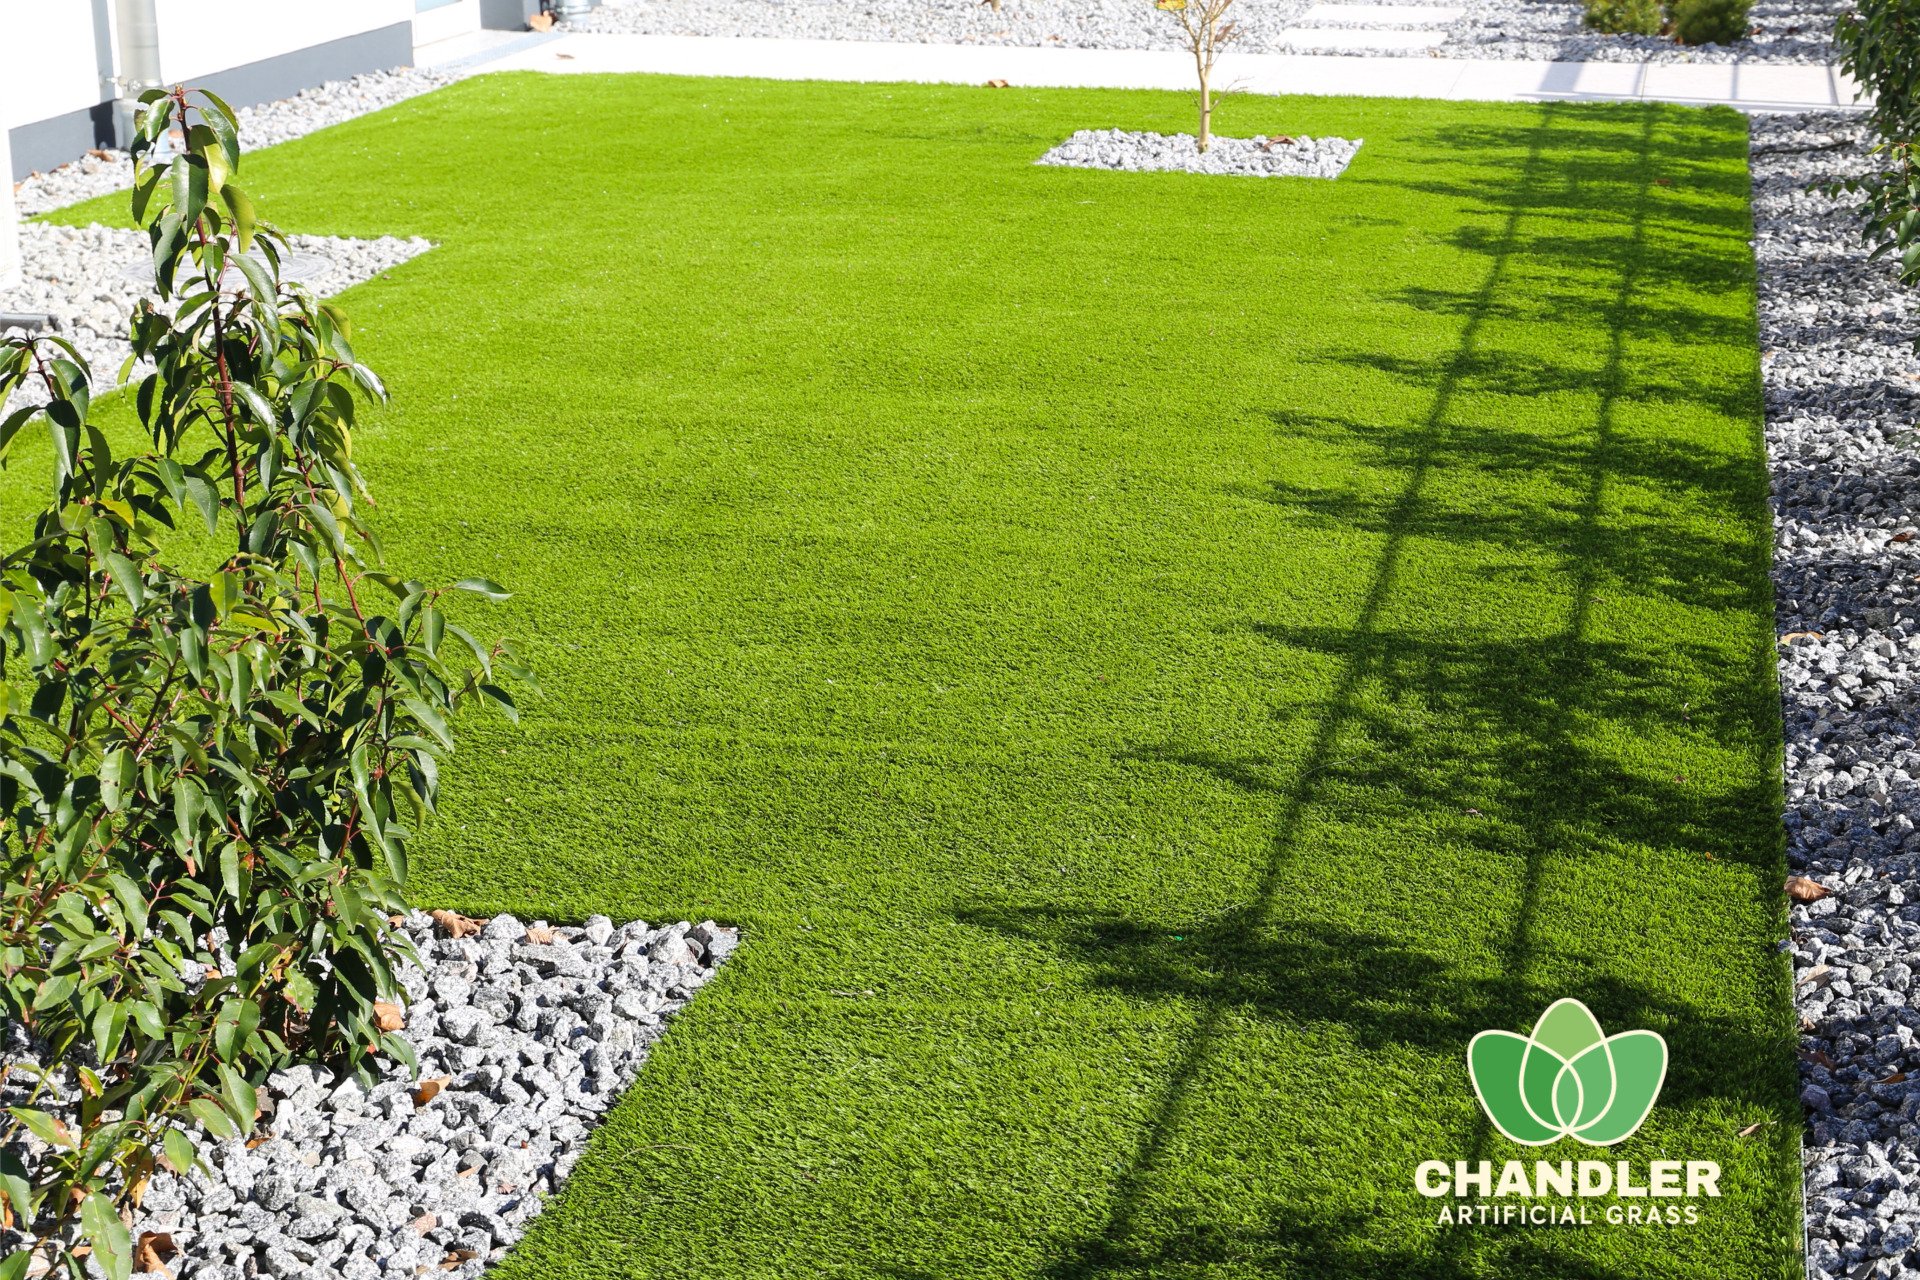 Is Artificial Grass in Chandler Eco-Friendly?